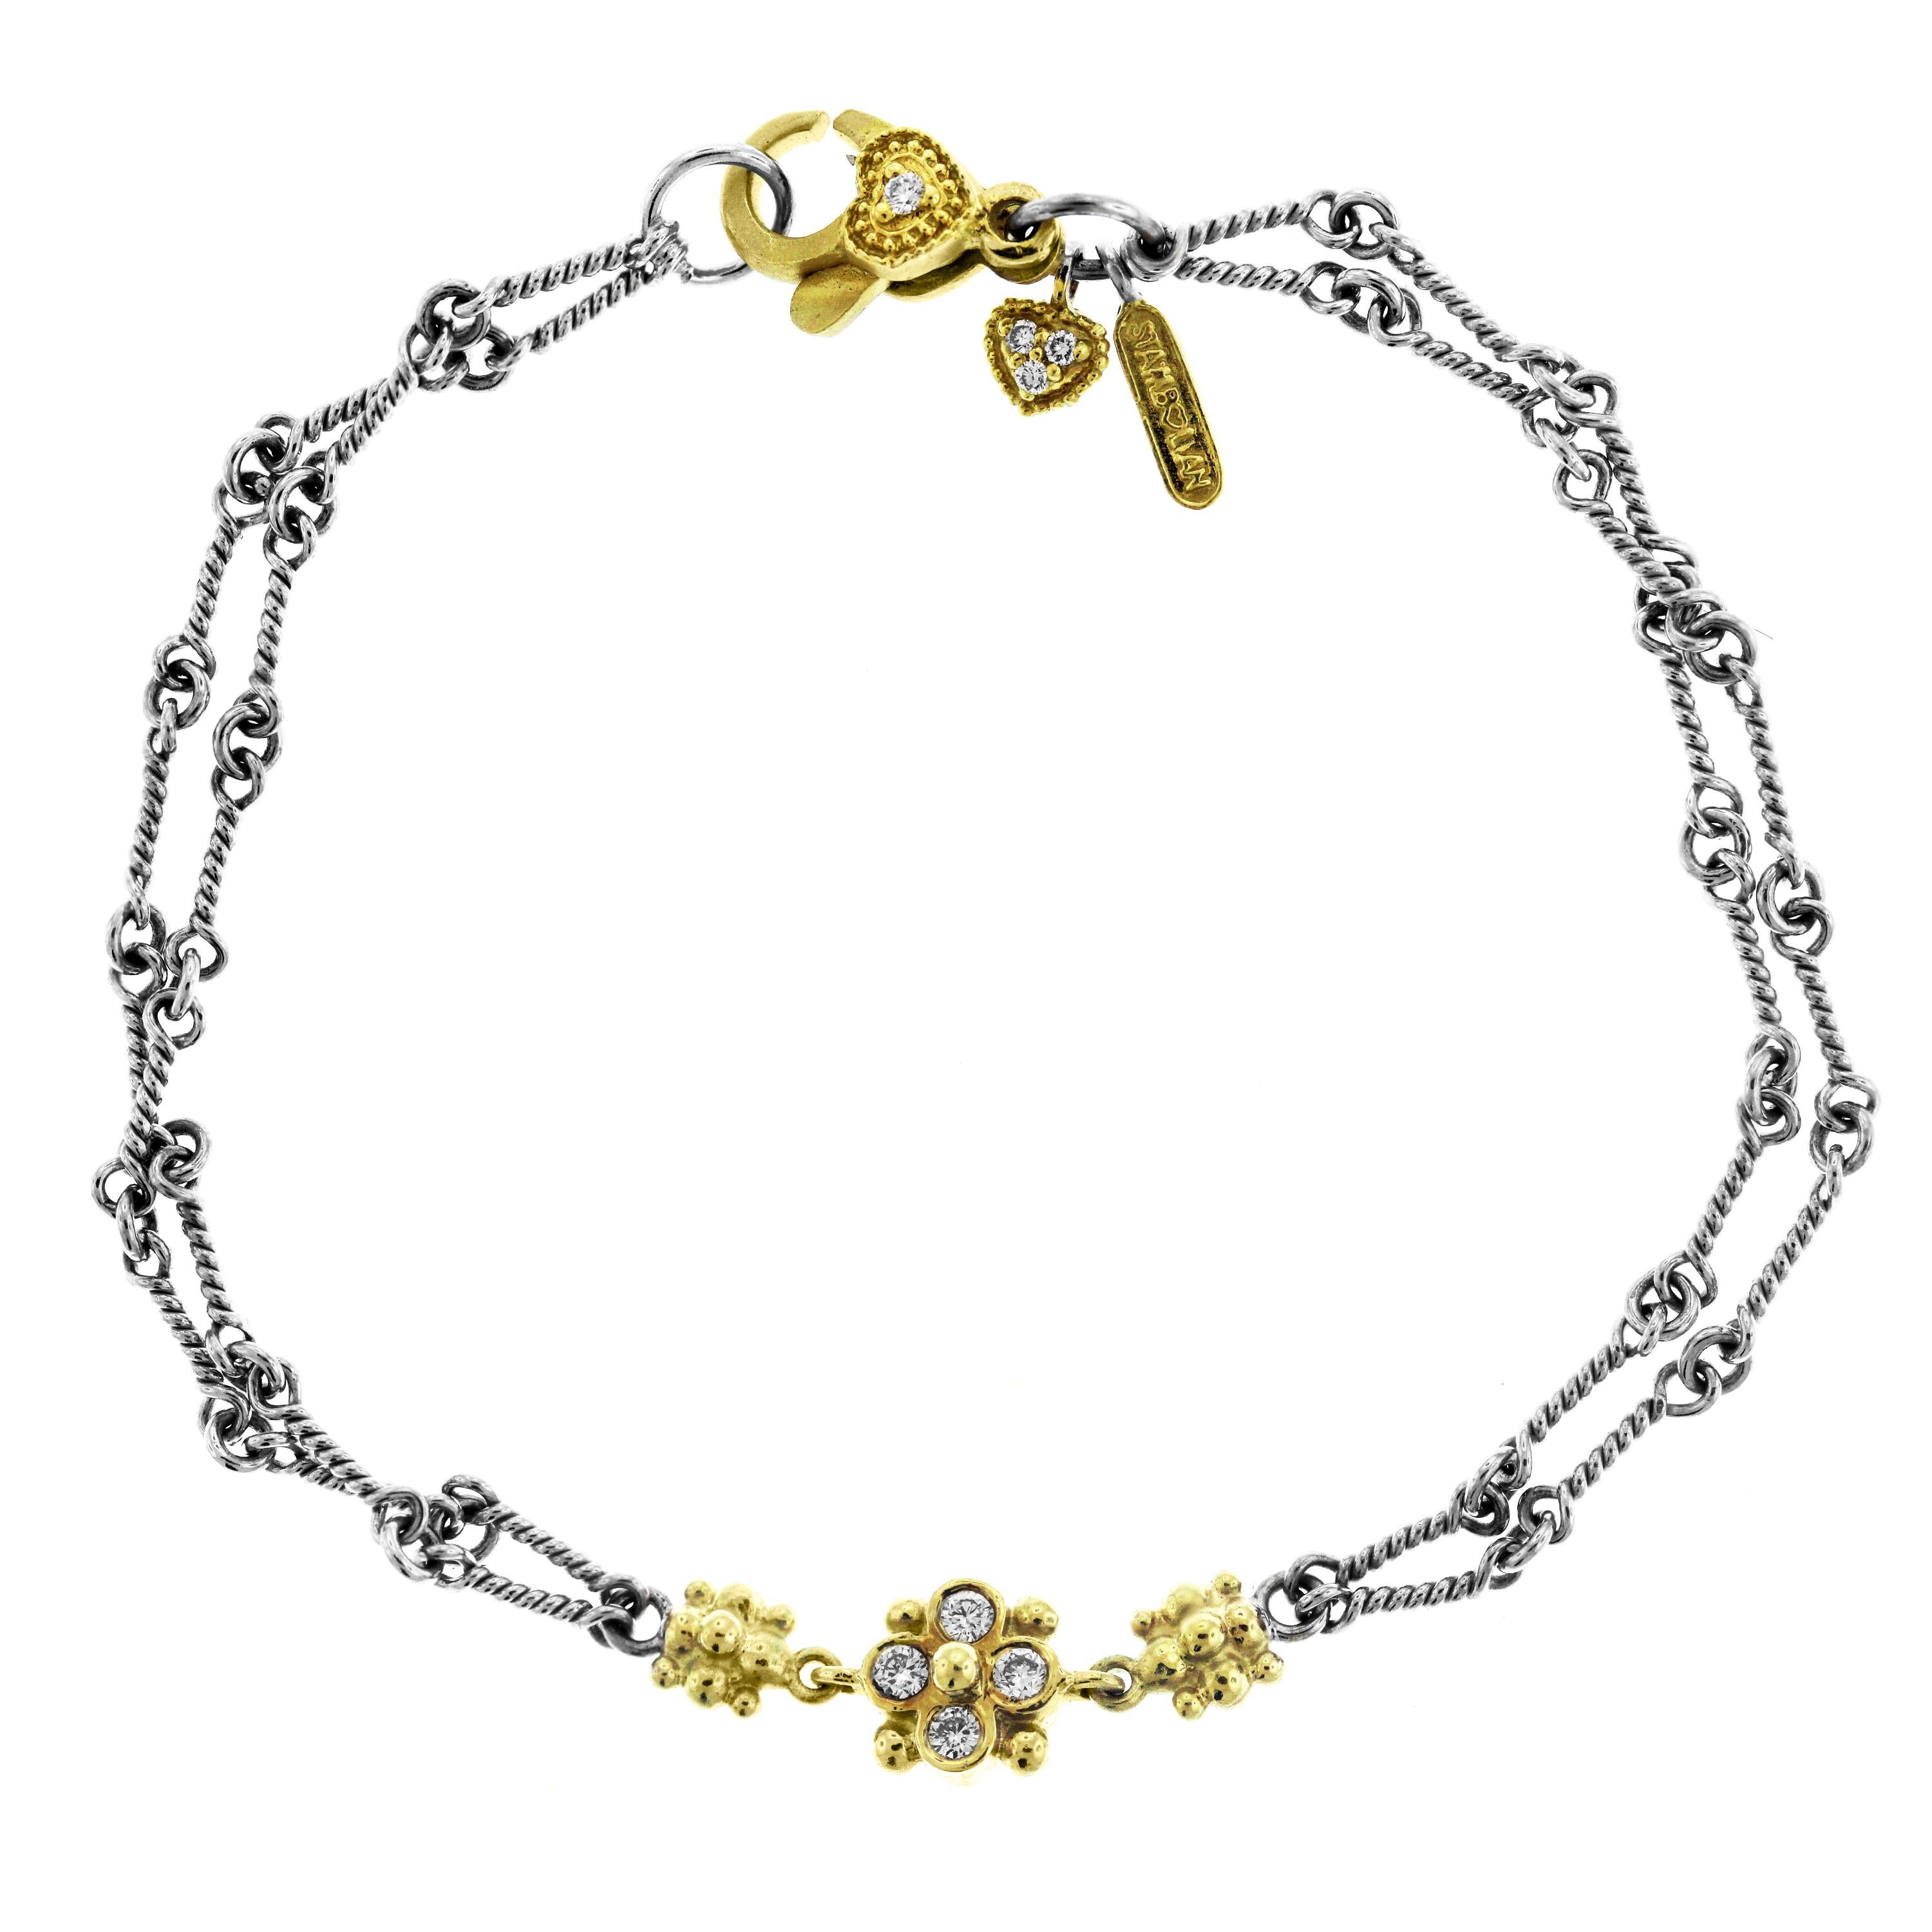 Two-Tone Yellow White Gold and Diamond Chain Bracelet with Flower Cluster